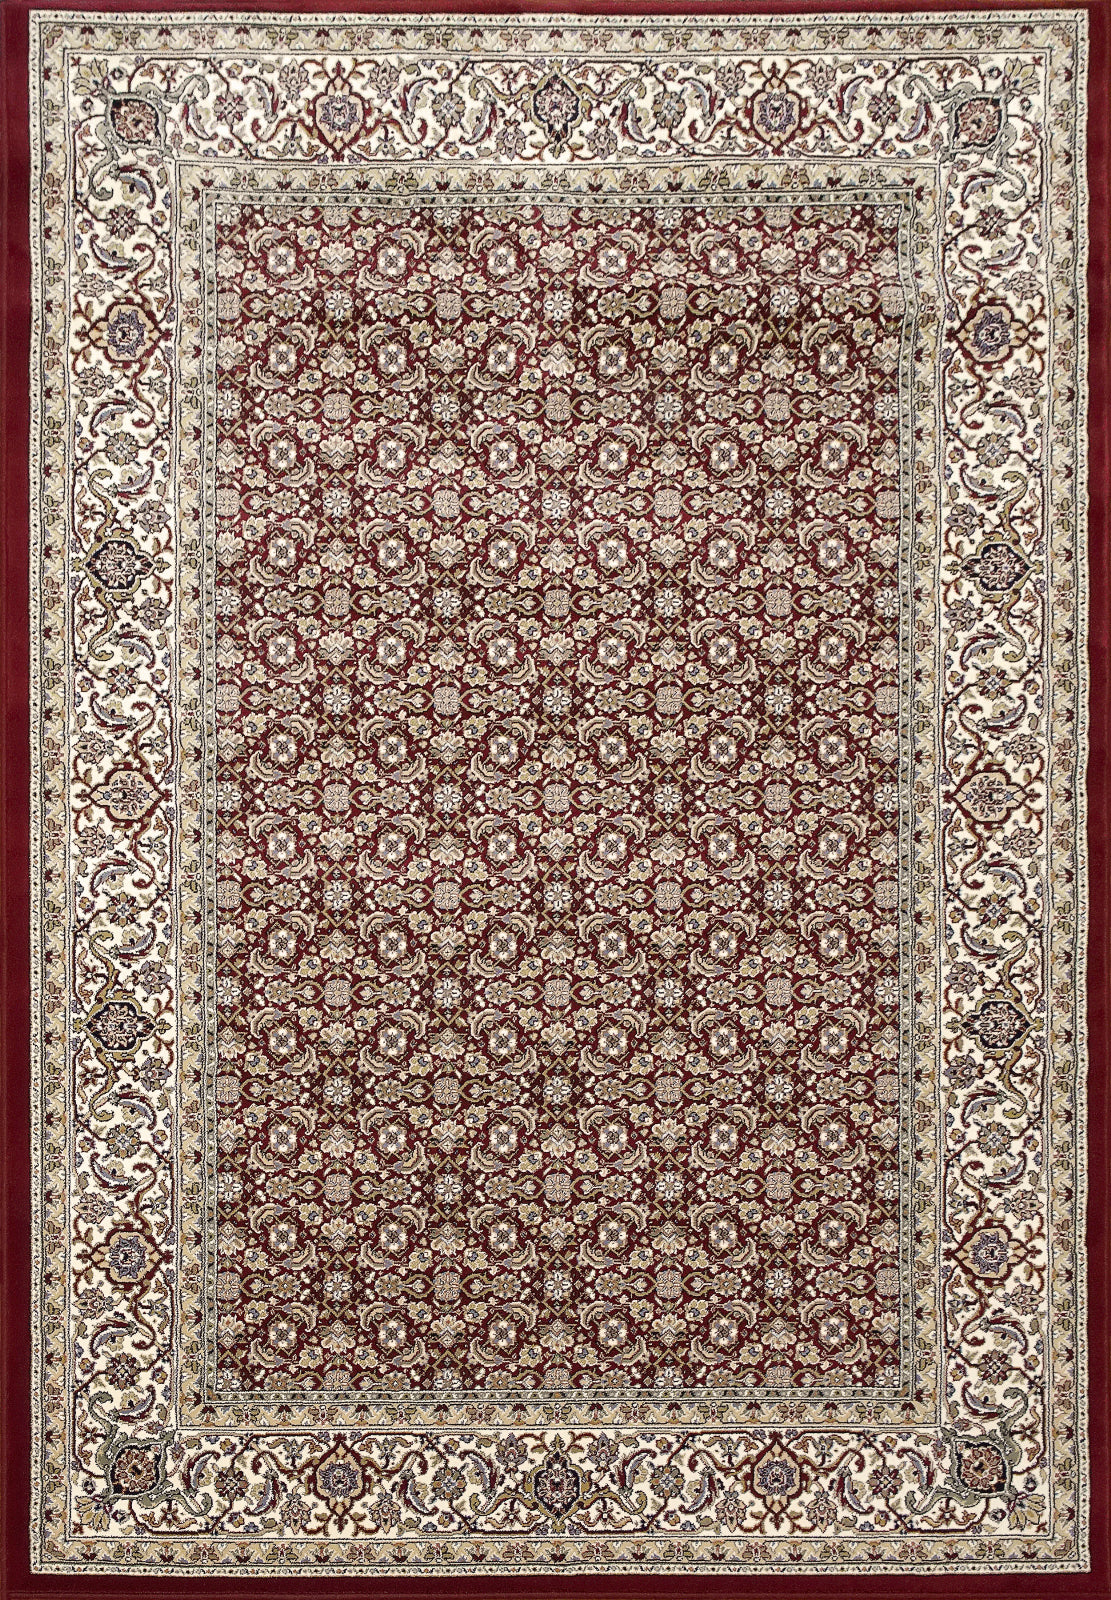 Dynamic Rugs Ancient Garden 57011 Red/Ivory Area Rug main image